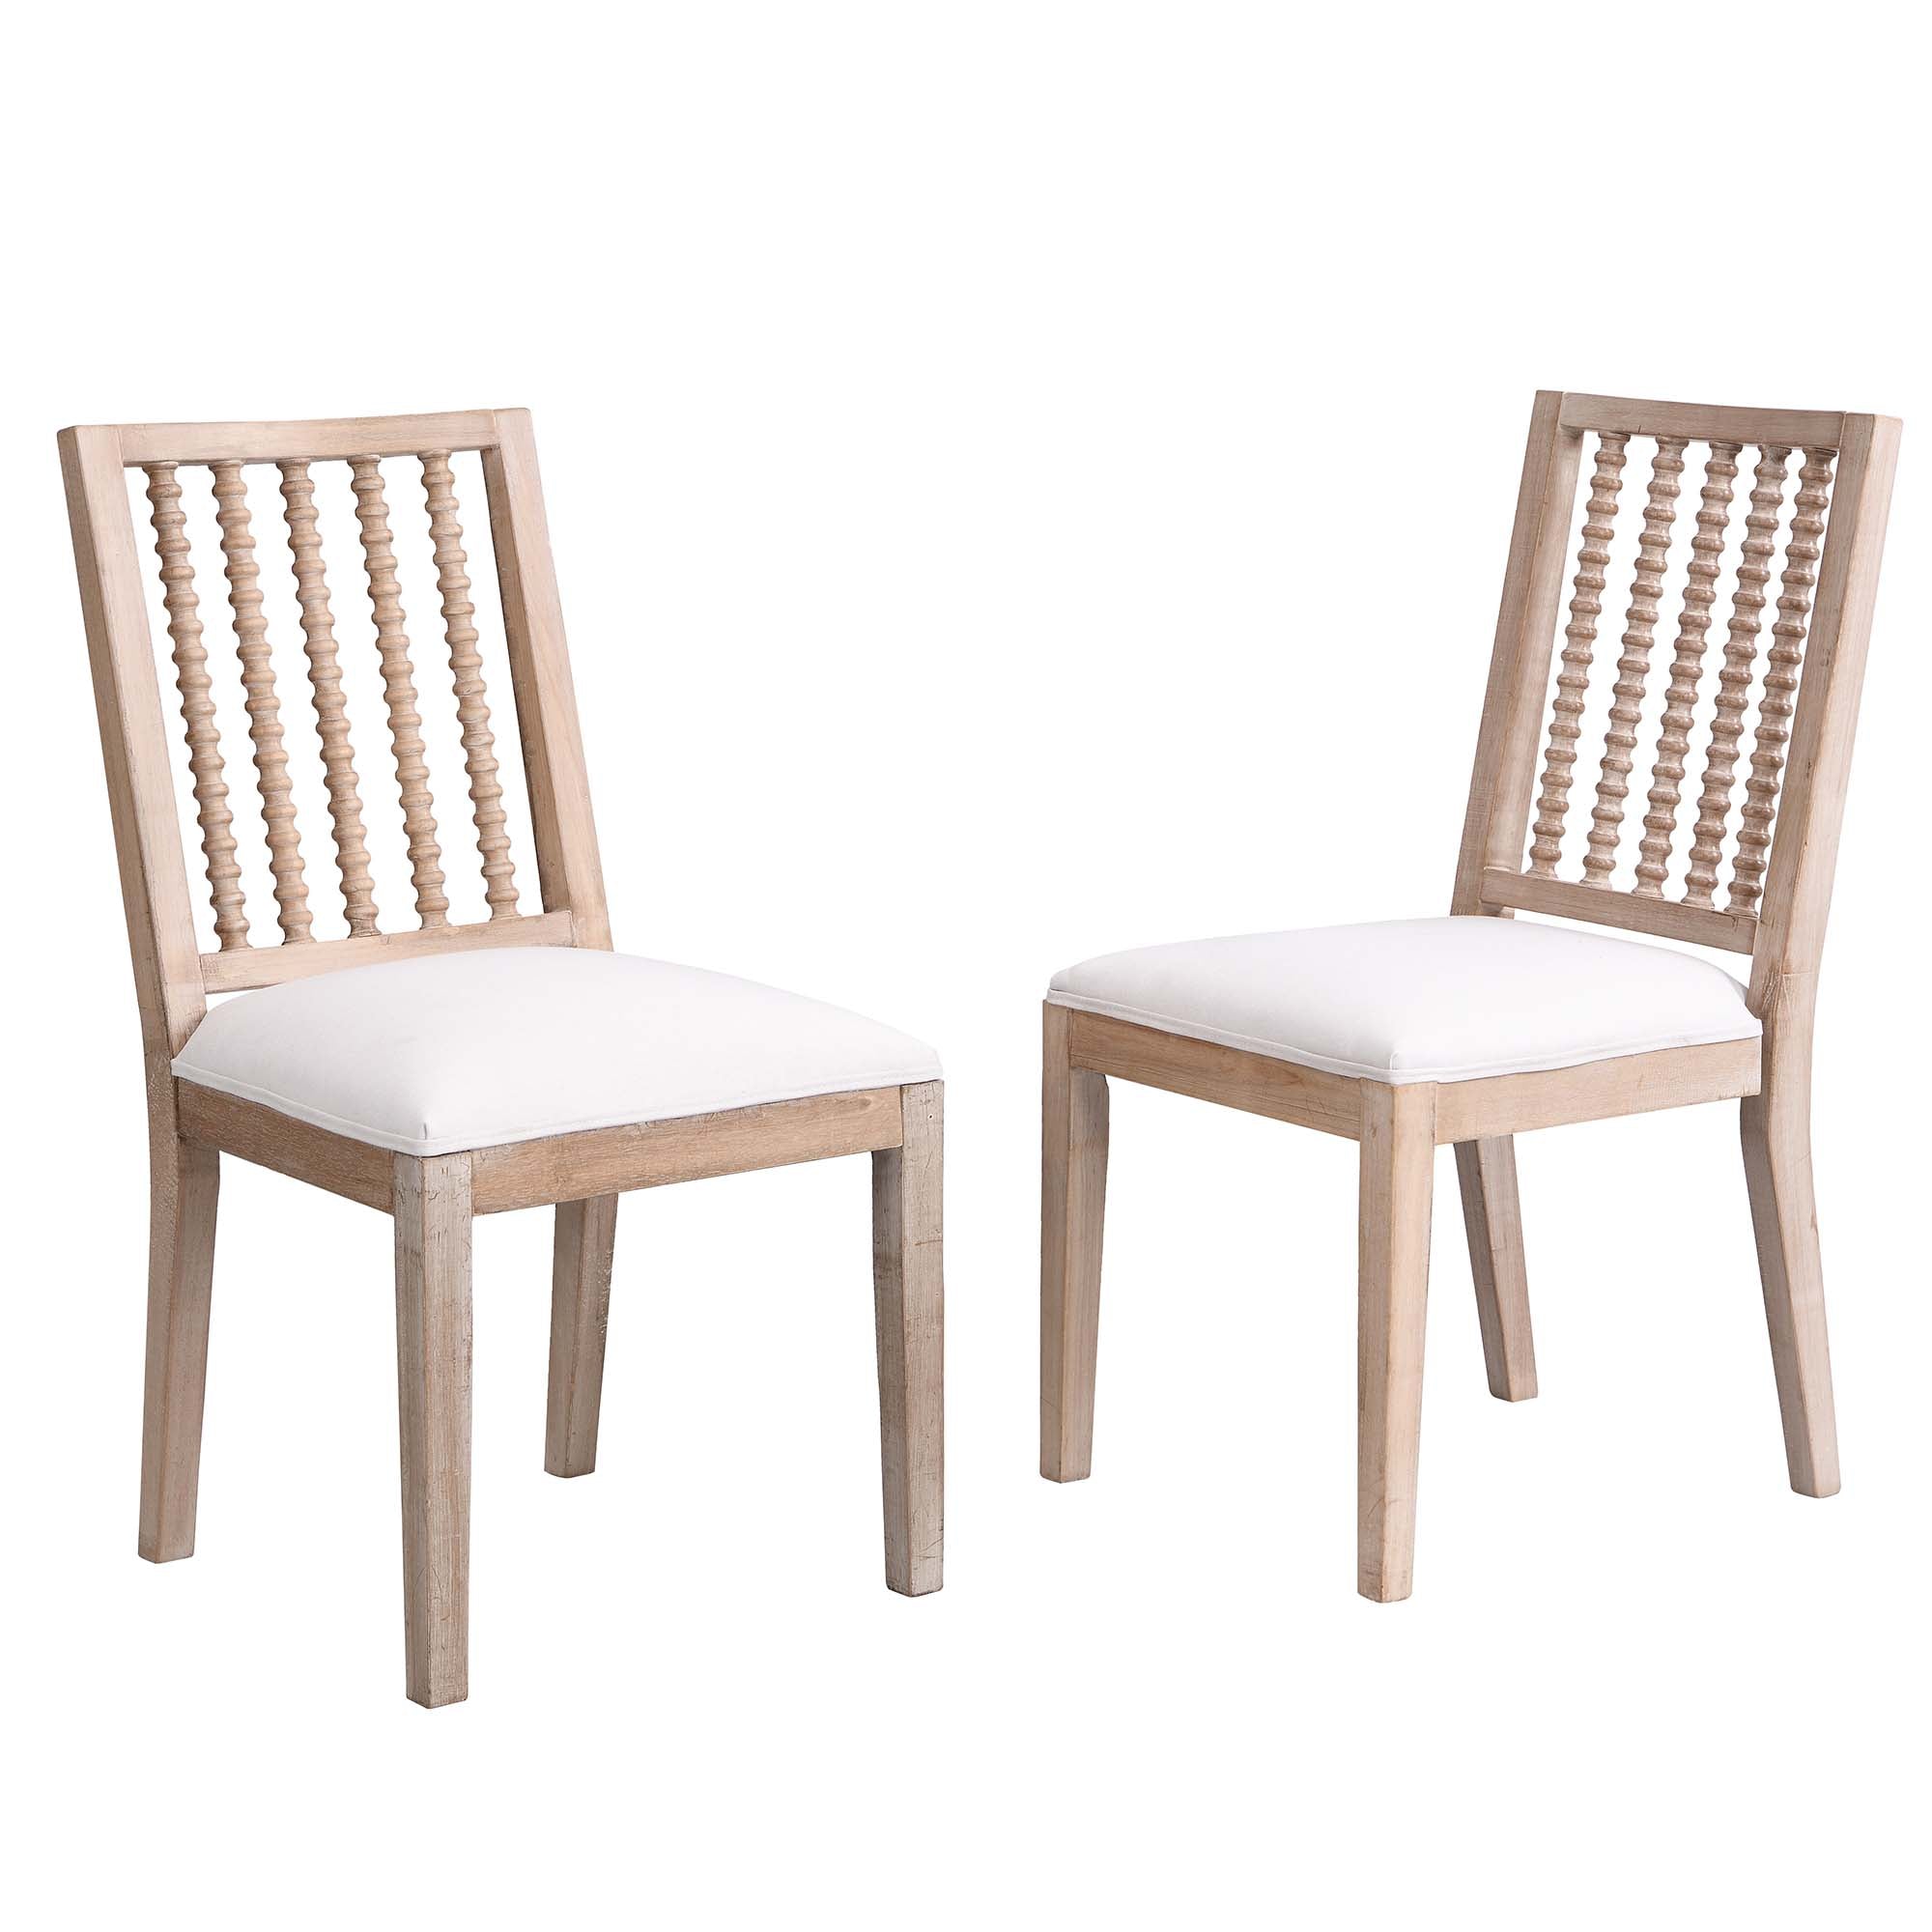 Hemingford Set of 2 Beige Fabric Bobbin Spindle Dining Chair